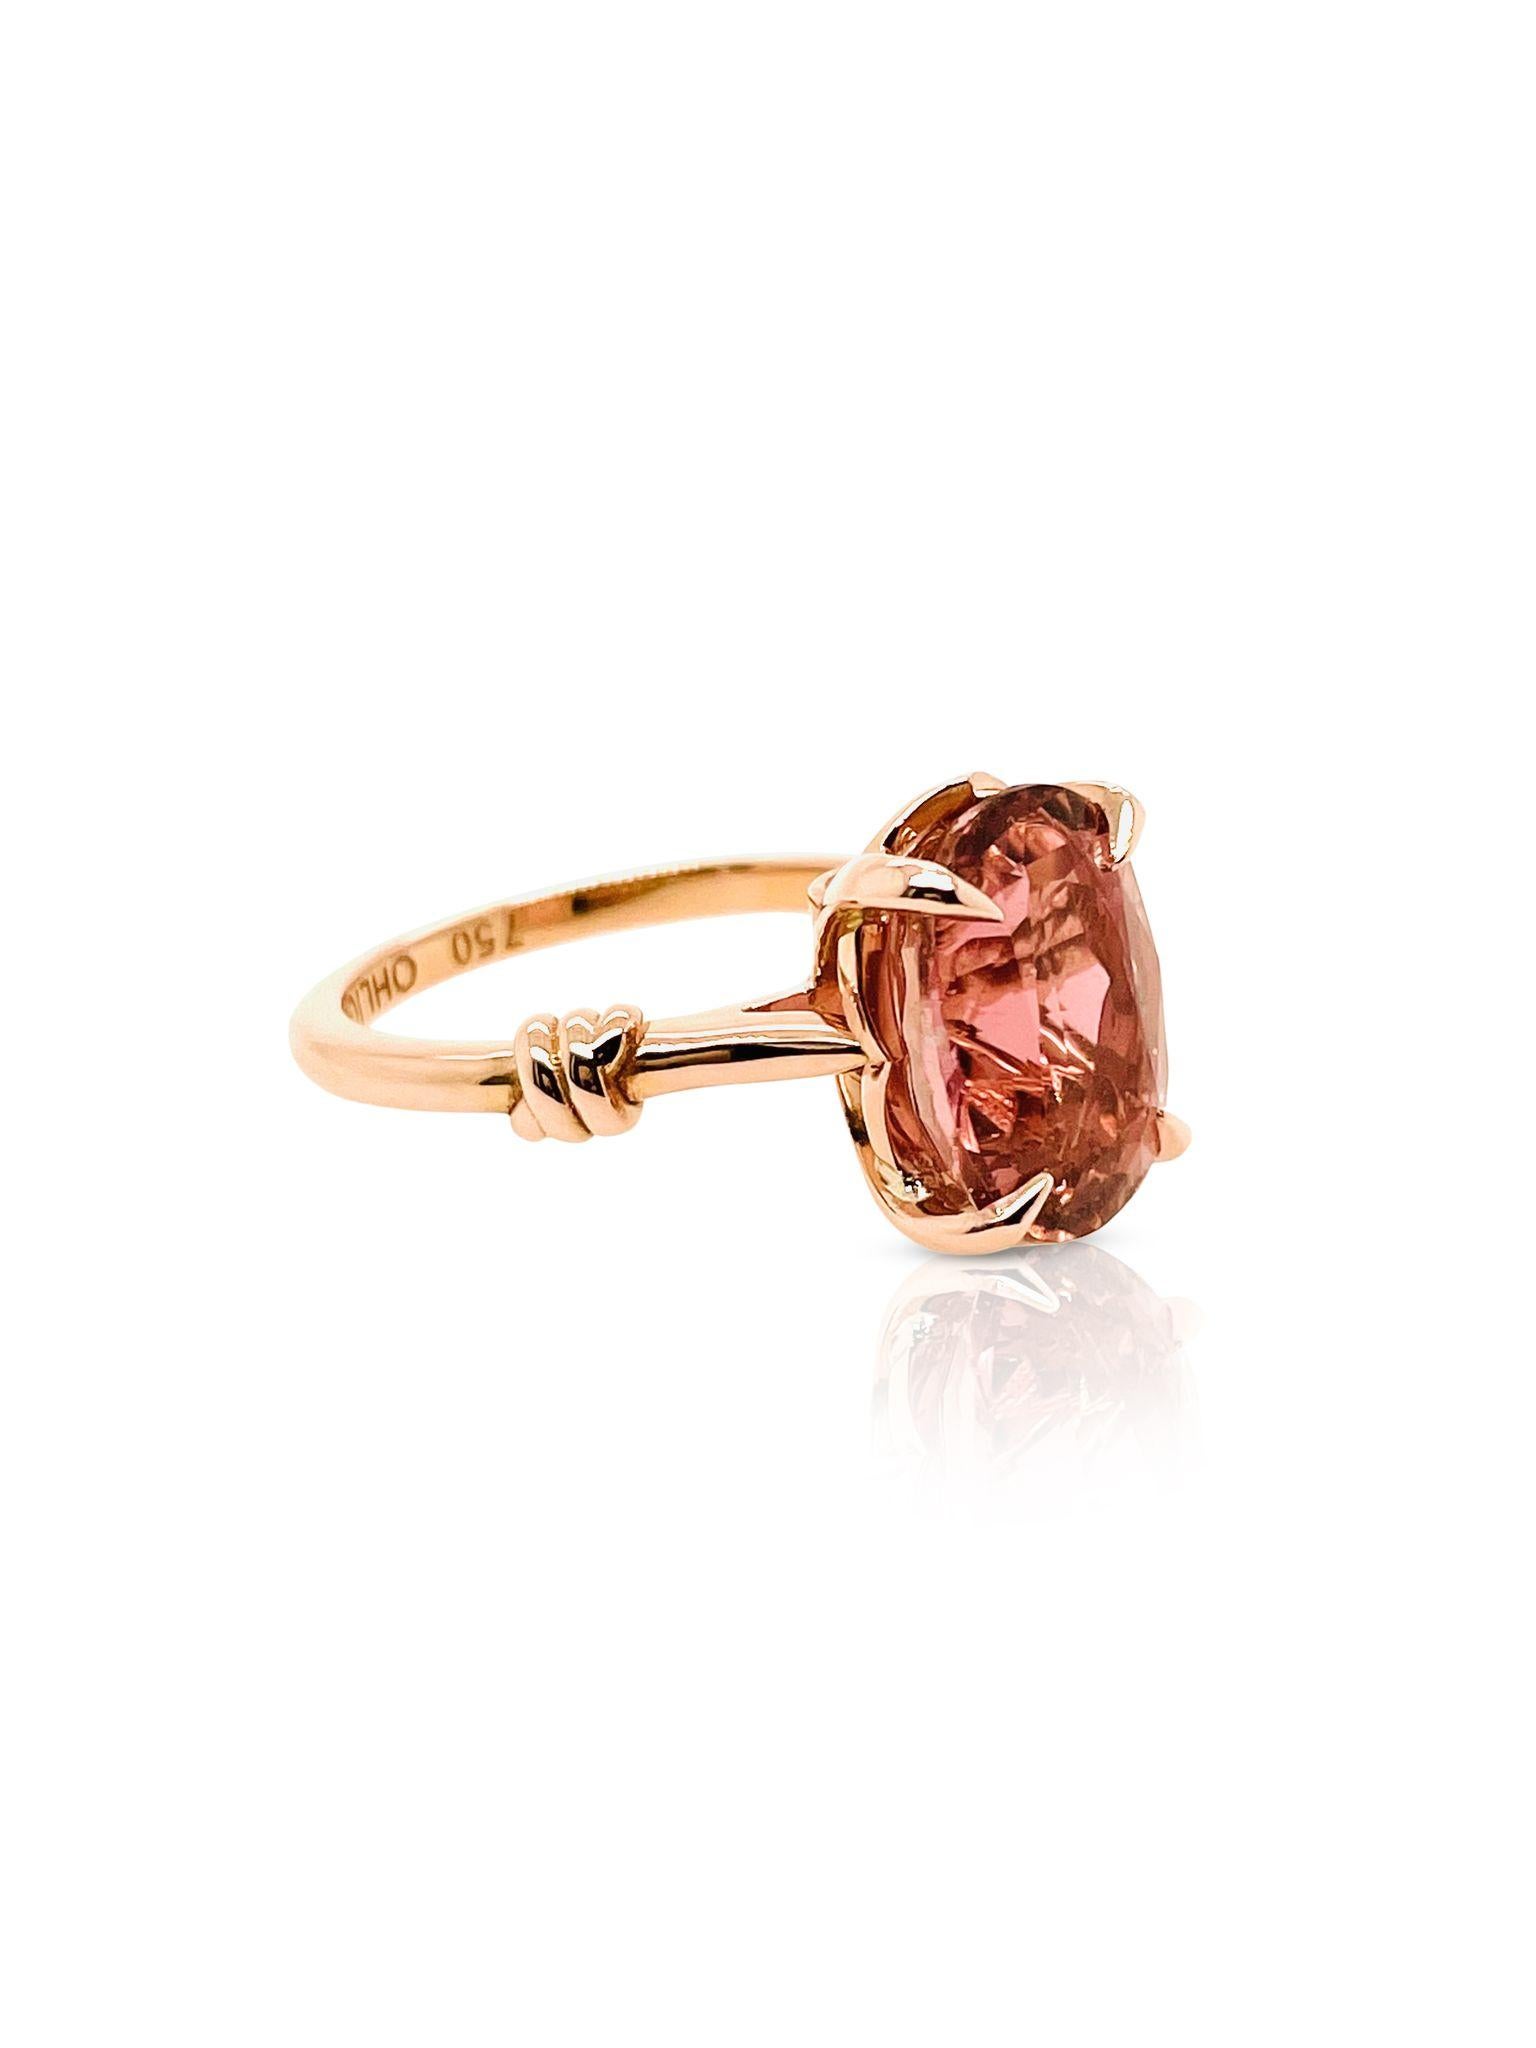 5ct oval cut Forget Me Knot Ring in 18ct Rose gold

Oval Cut

Pink Tourmaline natural gemstone

Round Brilliant cut diamonds FSI set either side of the setting

Made to order * Customizable in your size 
Available in 18ct rose, white and yellow